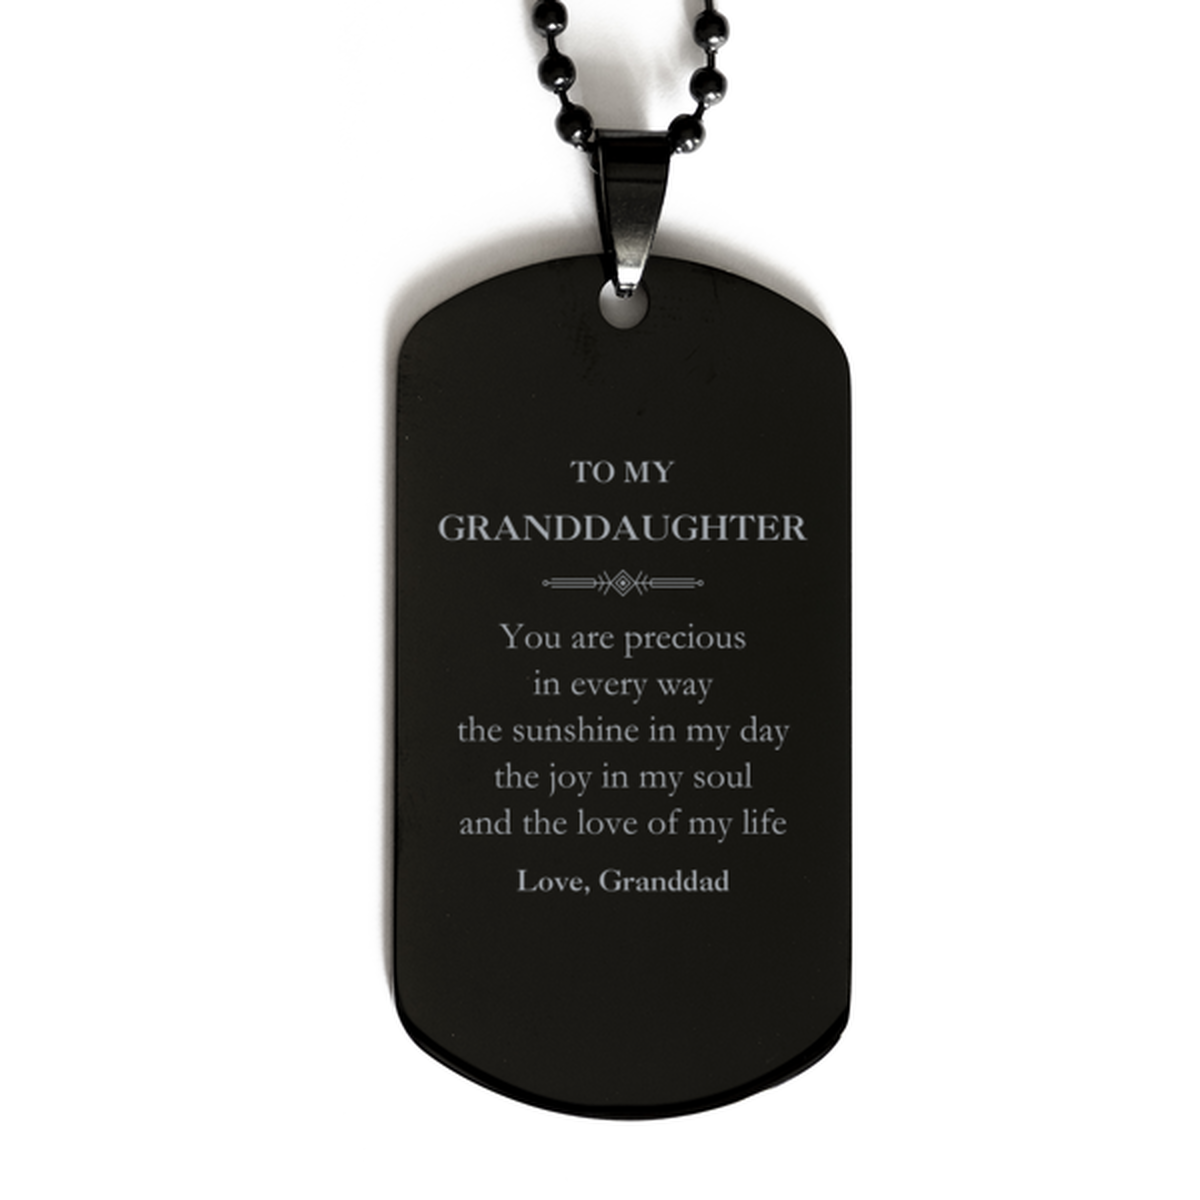 Graduation Gifts for Granddaughter Black Dog Tag Present from Granddad, Christmas Granddaughter Birthday Gifts Granddaughter You are precious in every way the sunshine in my day. Love, Granddad